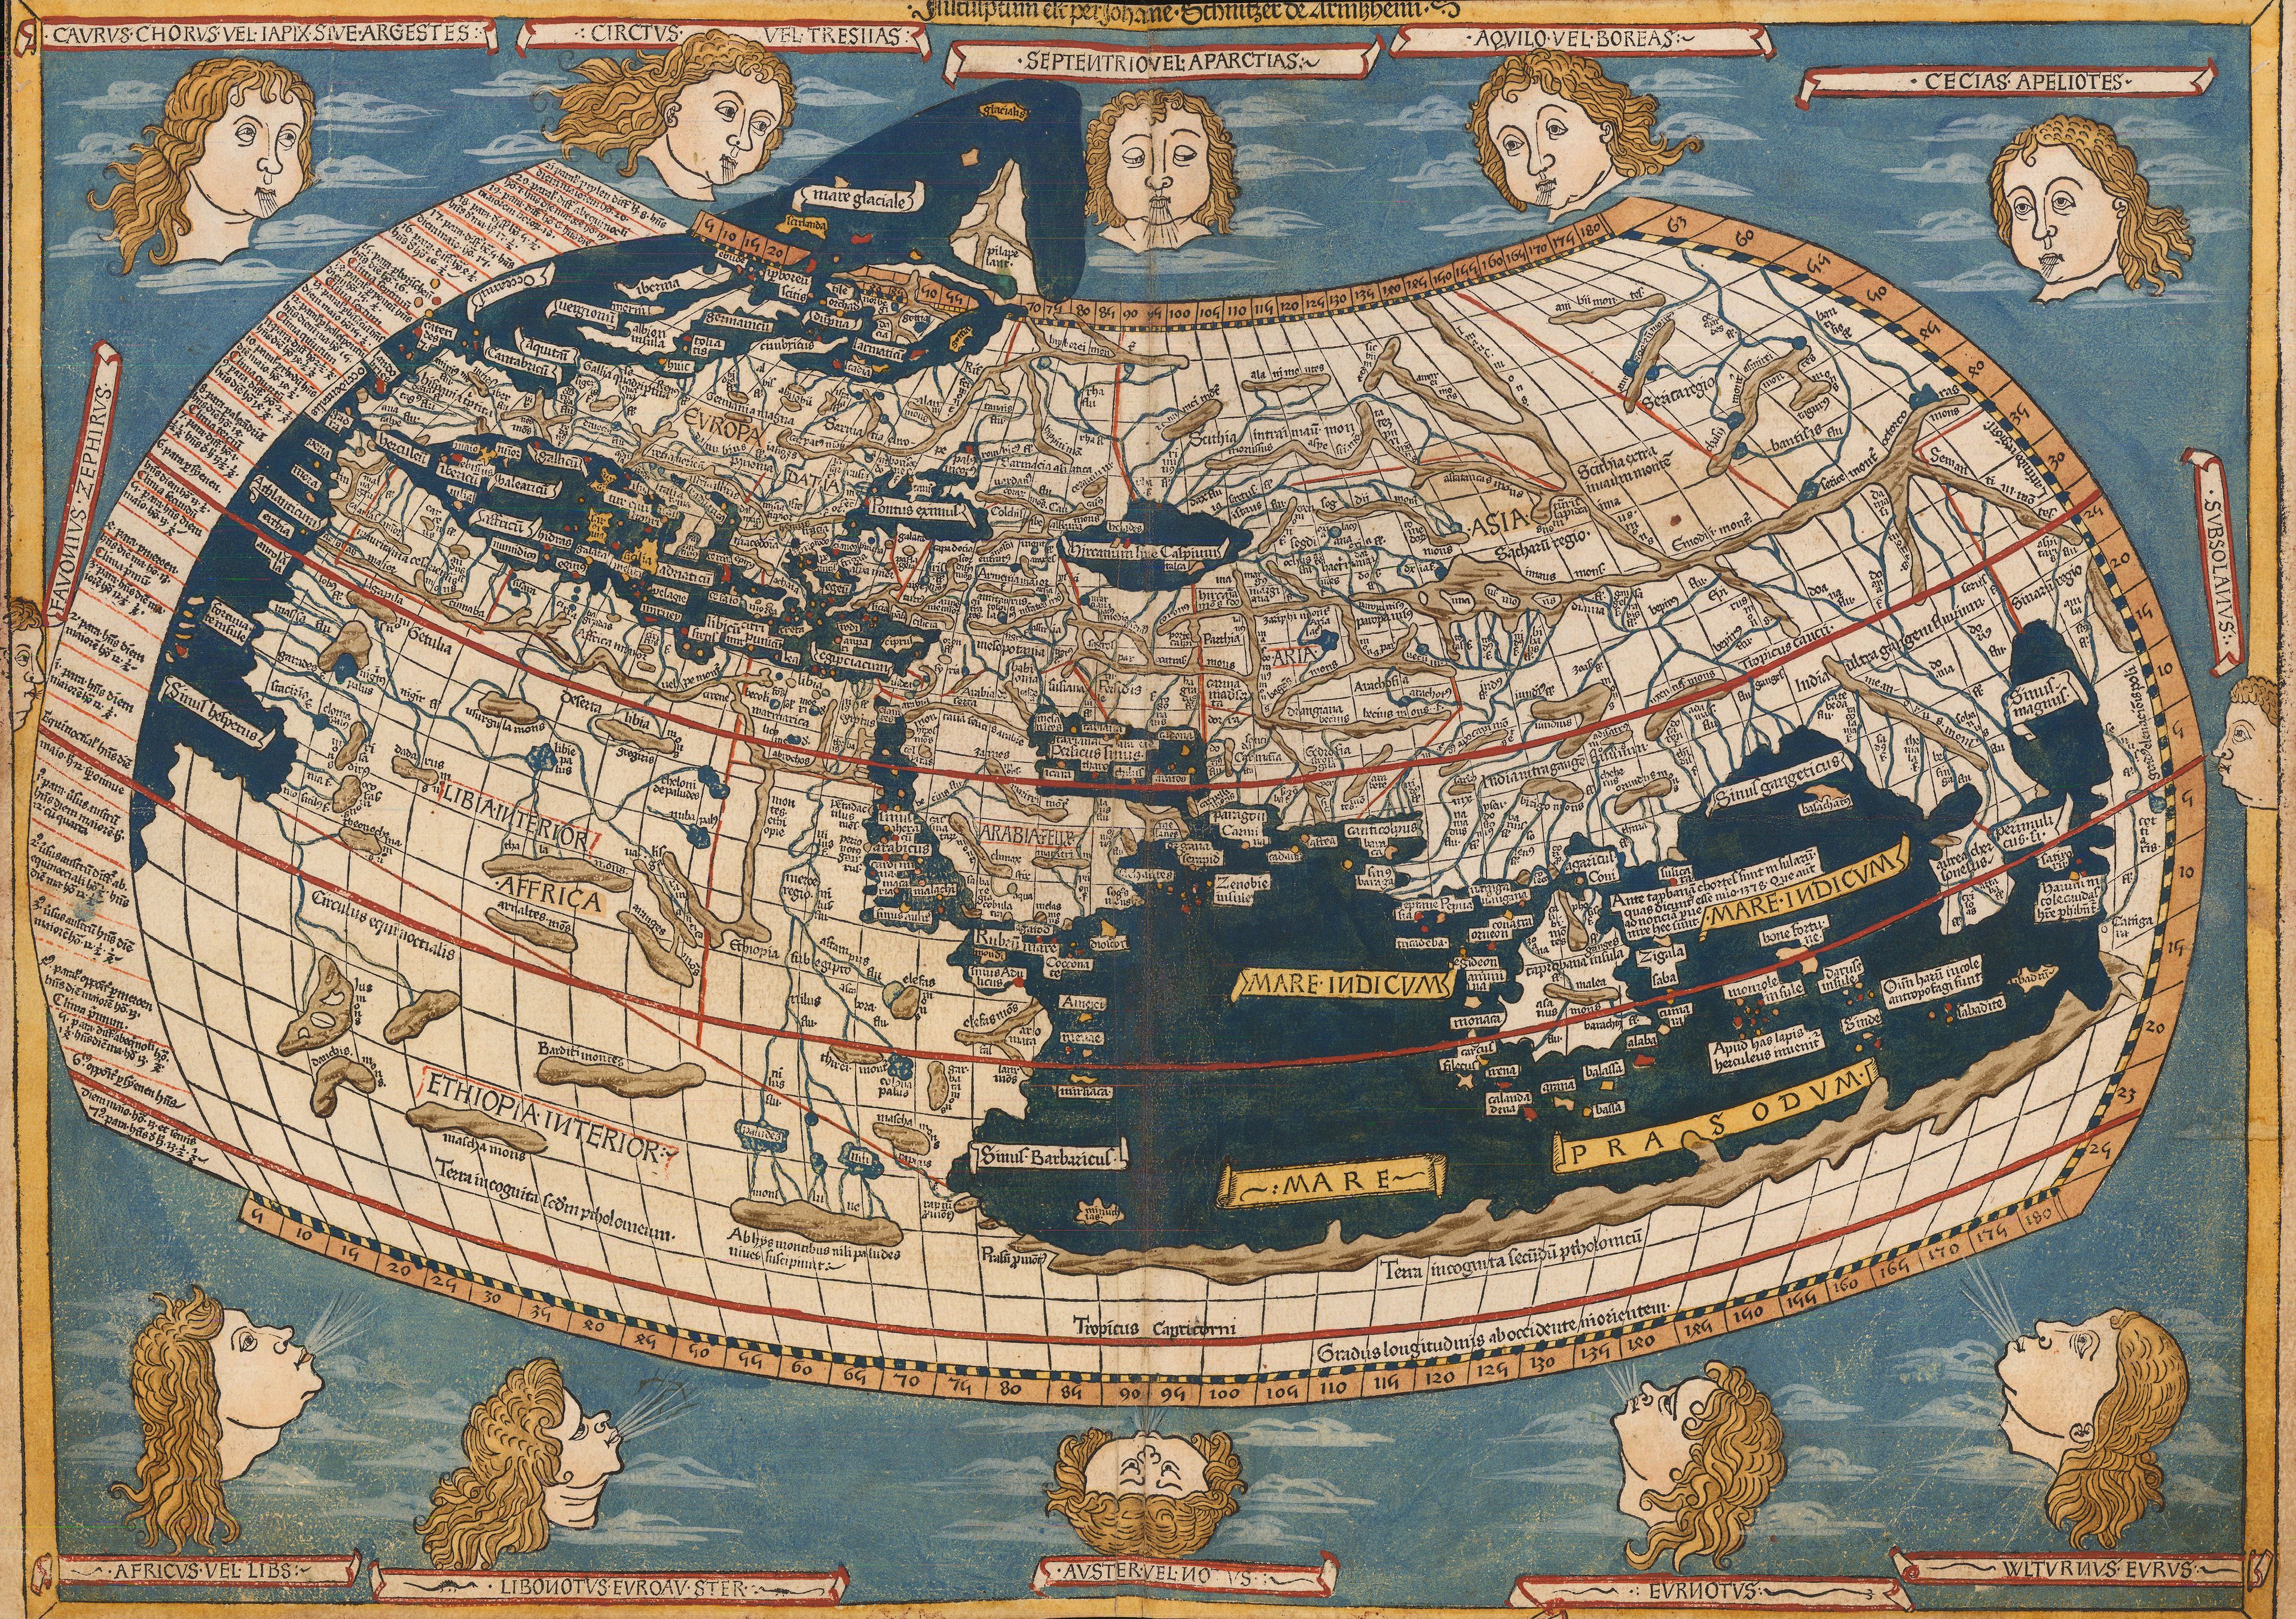 Ptolemaic World Map printed from a woodcut by Lienhart Holl, set against a blue sky with clouds surrounding the maps. There are 10 Windheads around the Earth.